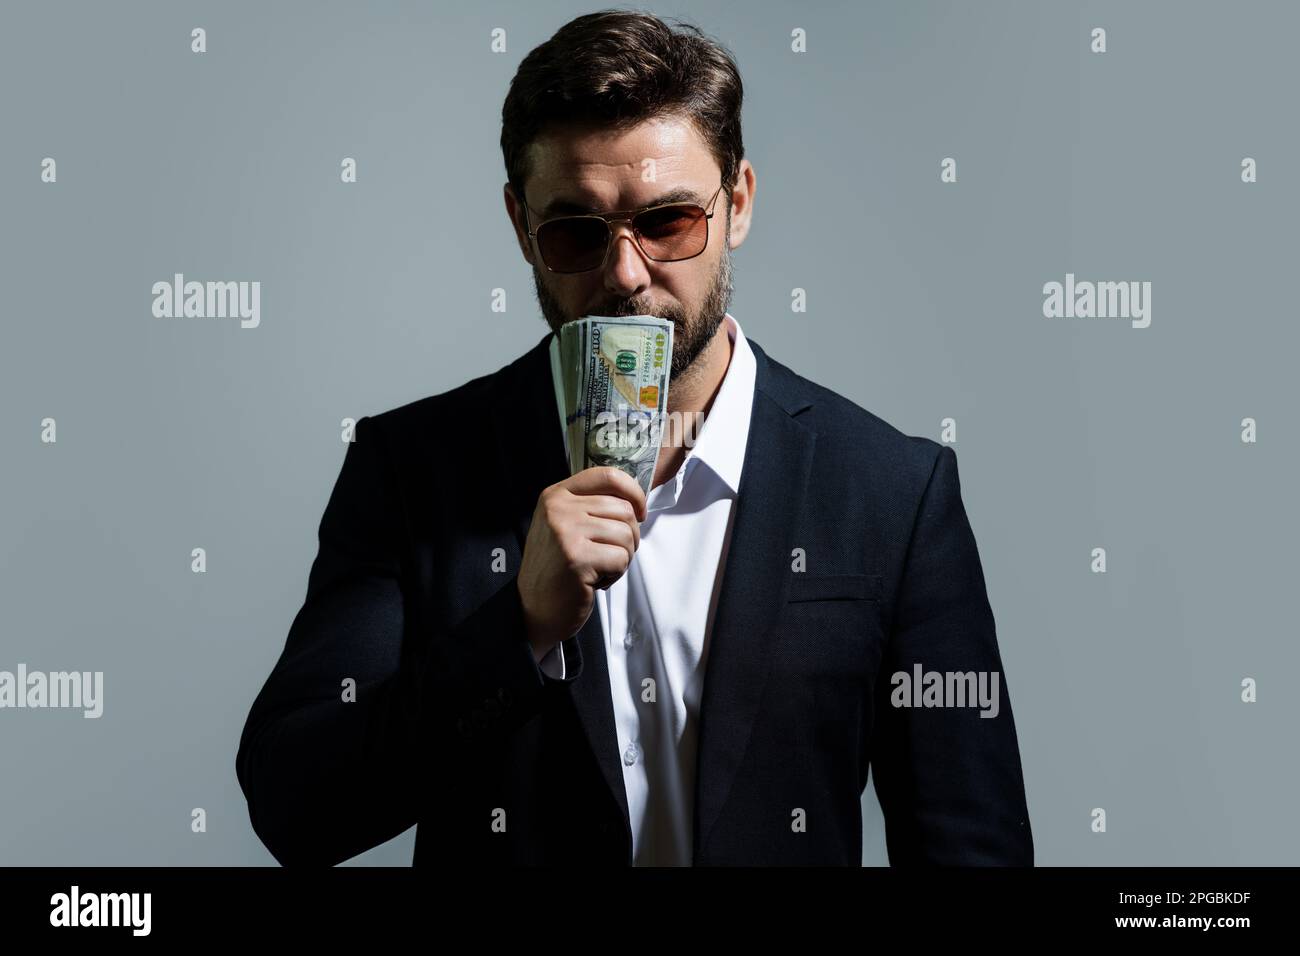 Man showing cash money in dollar banknotes. Portrait of business man isolated on gray studio background. Successful winner celebrating success or Stock Photo